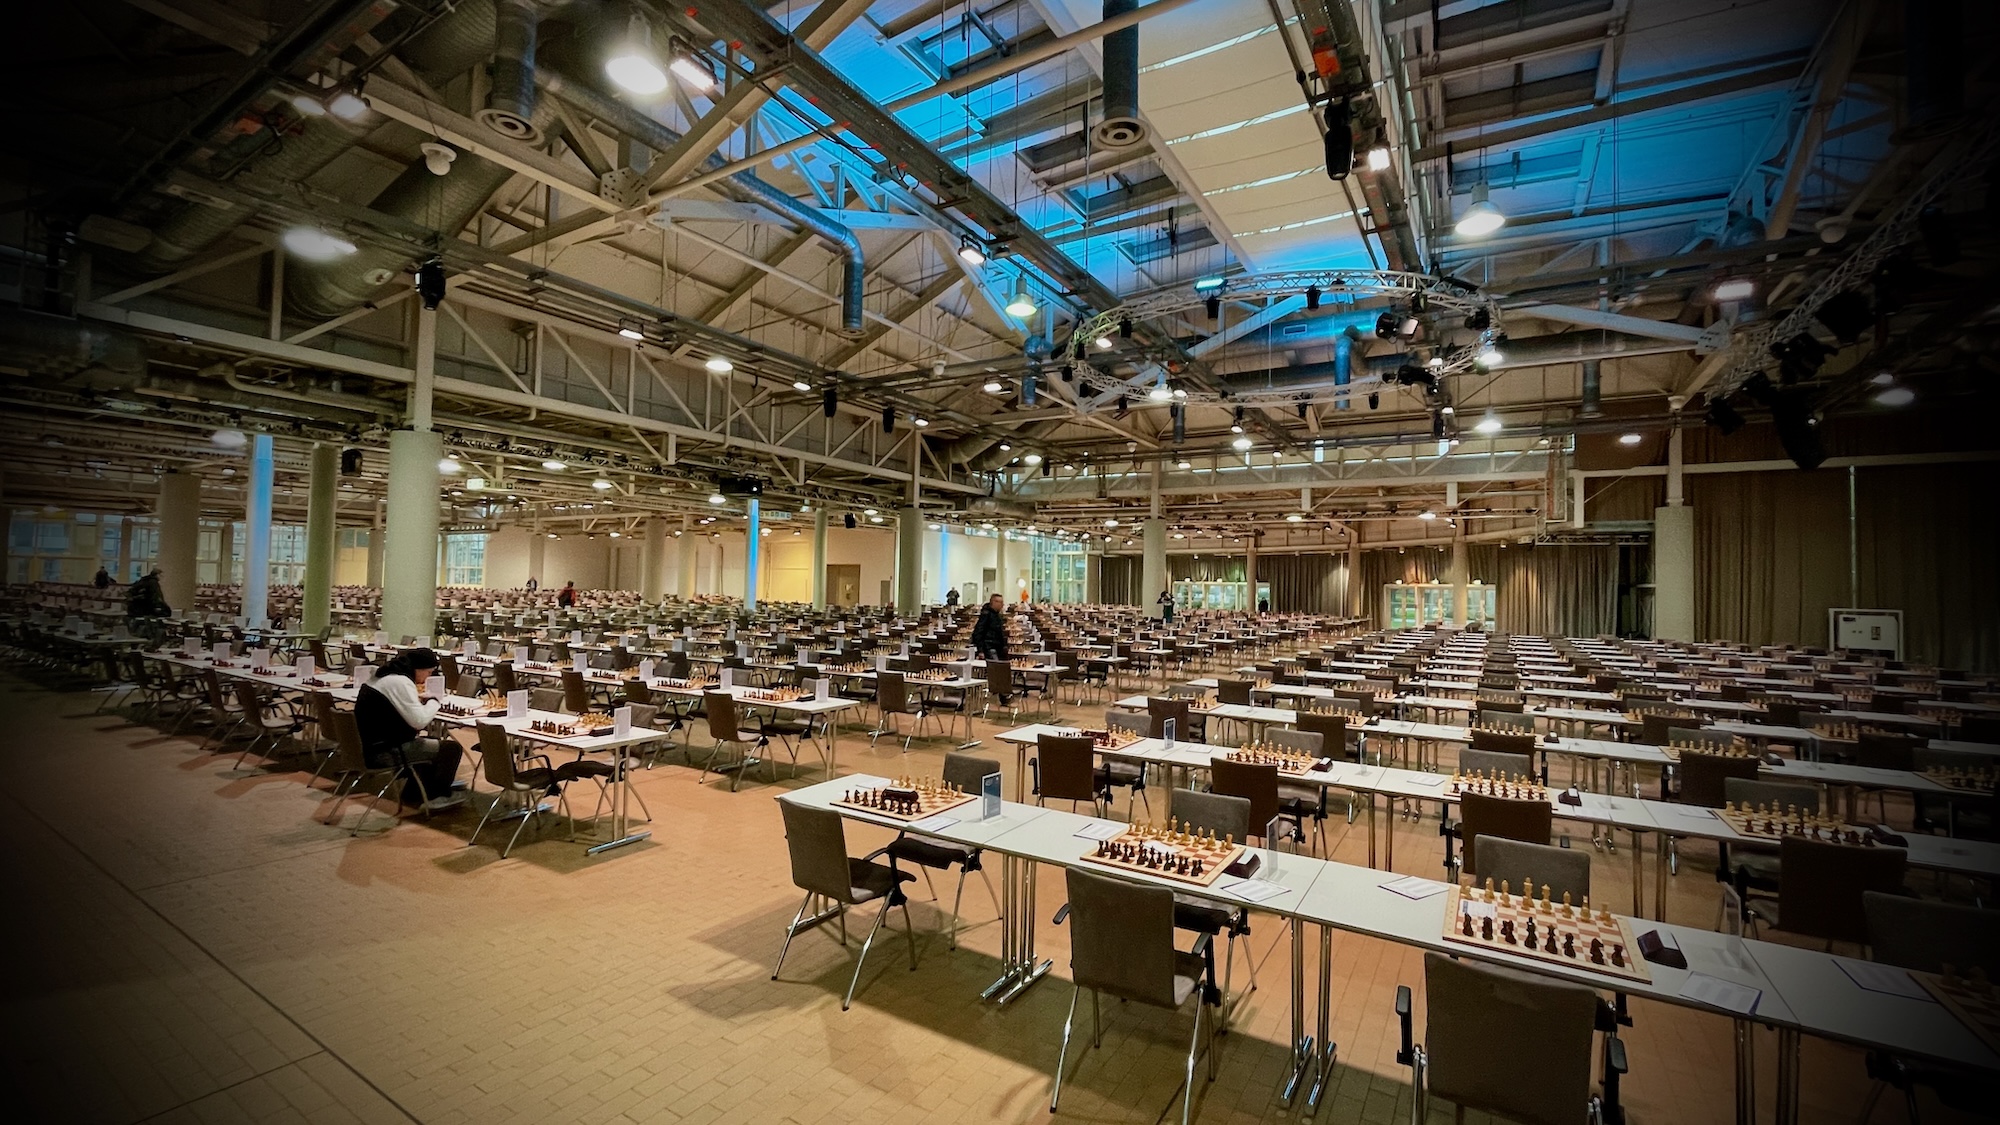 You are currently viewing Team “SC uBu” scores points at the largest chess open in the world!